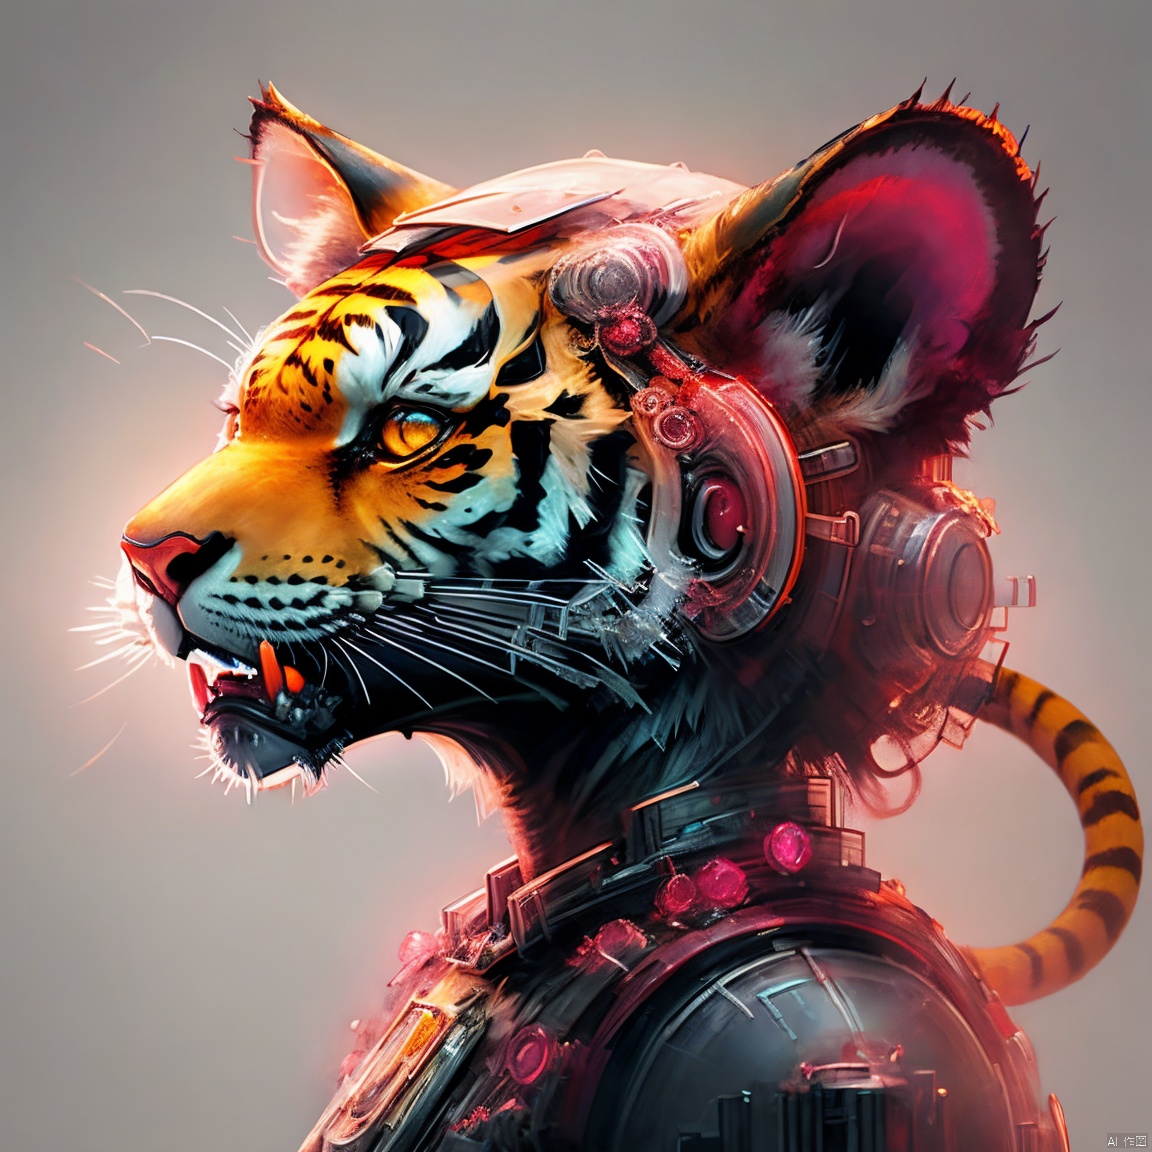 The robot, the head of a tiger, has an extremely delicate and complex mechanical structure on the front, with illustrations, X-ray perspective, and by Nick Veasey, the image appears very ethereal, reflecting the beauty of technology and art,arttoy